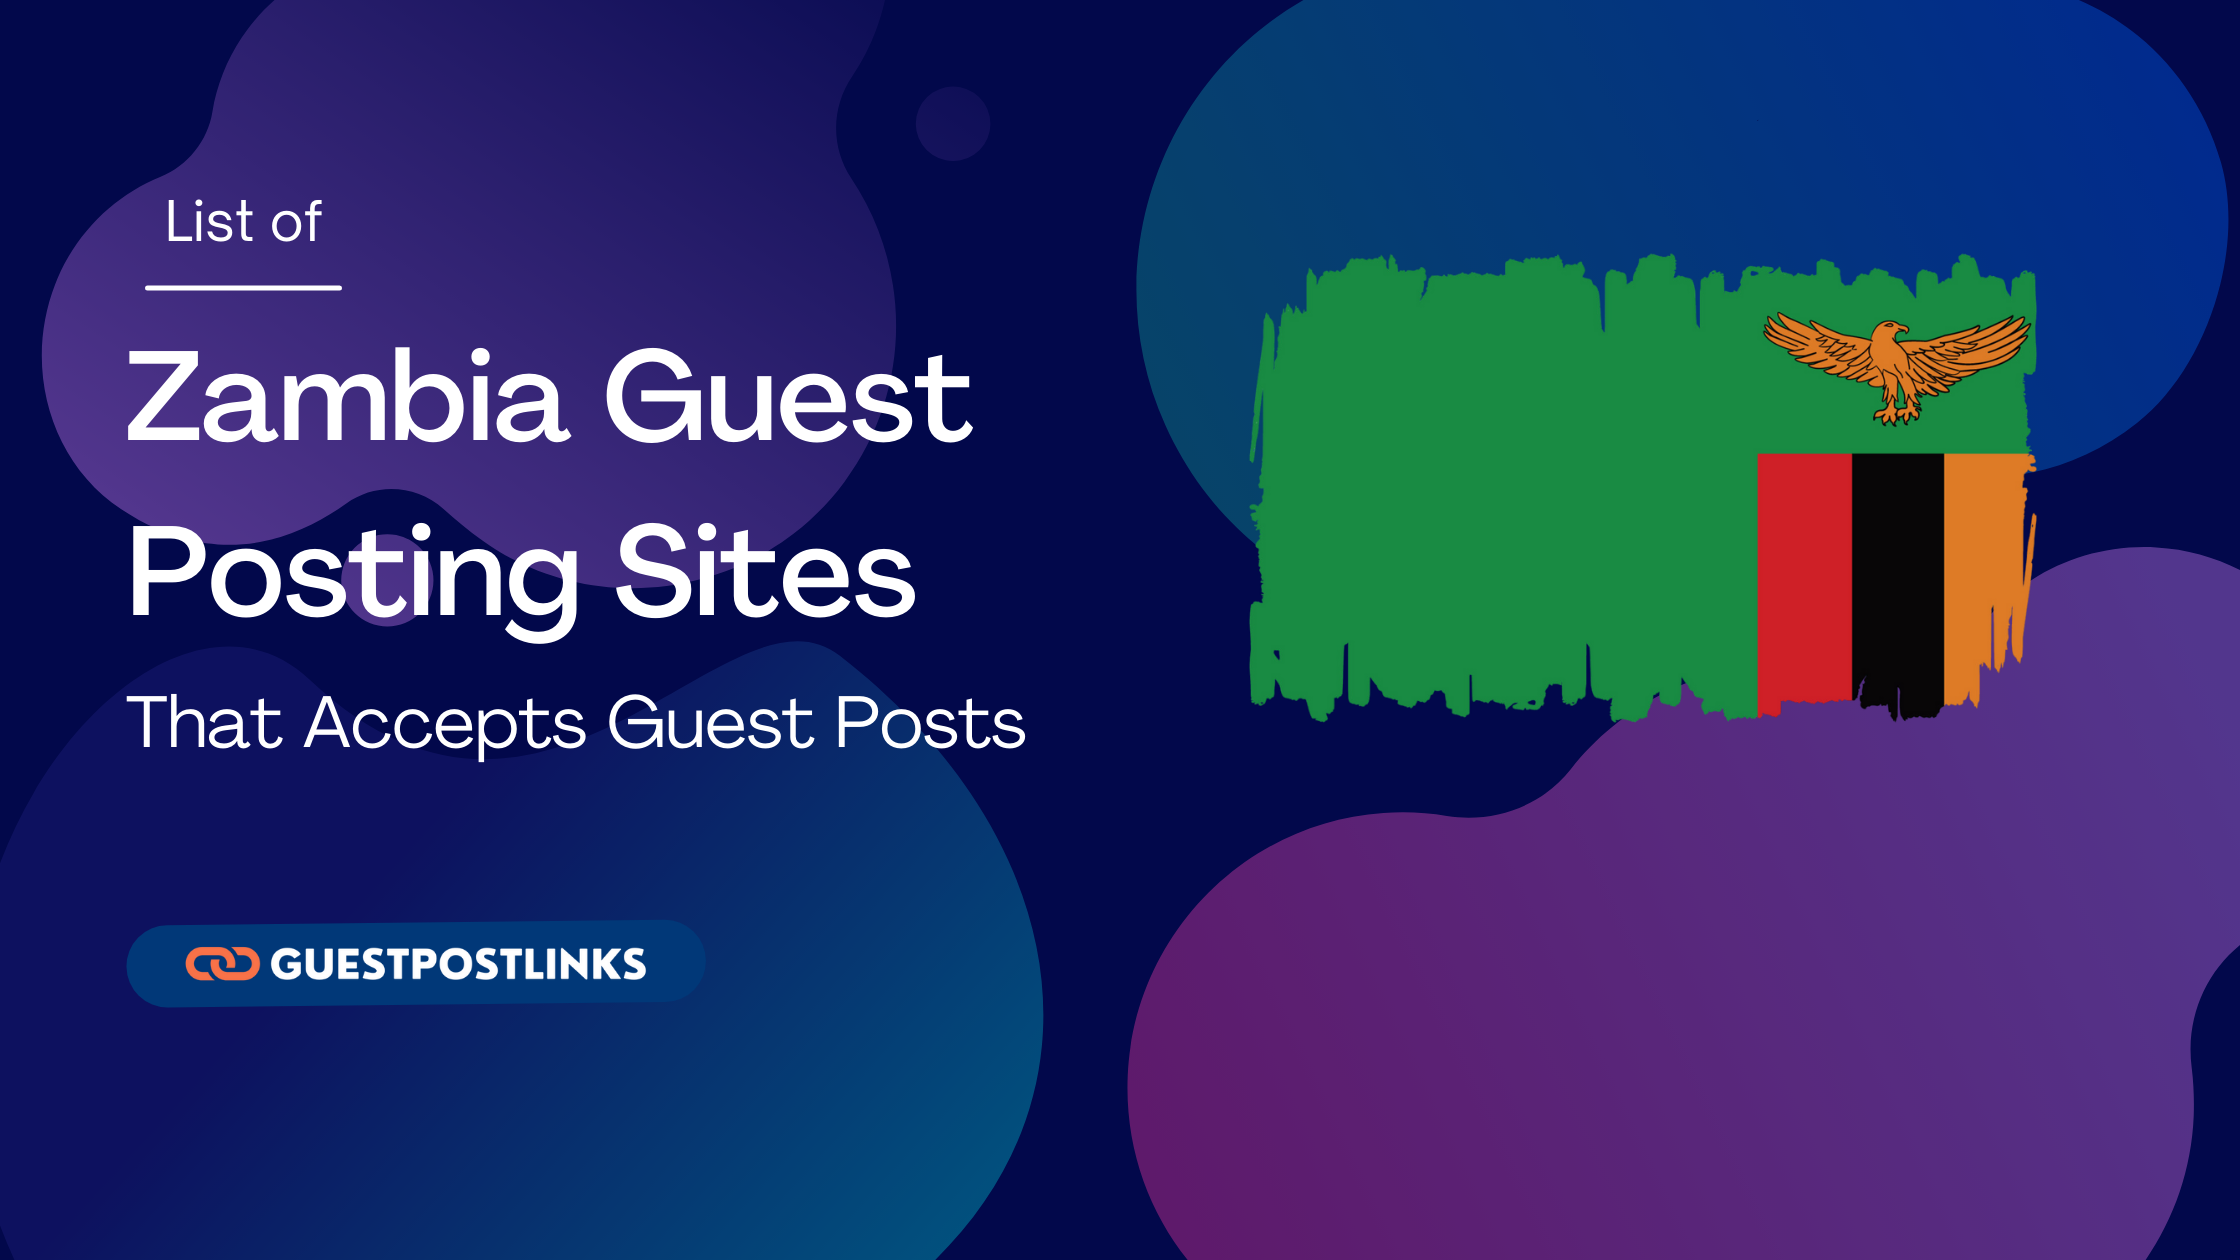 Zambia Guest Posting Sites List